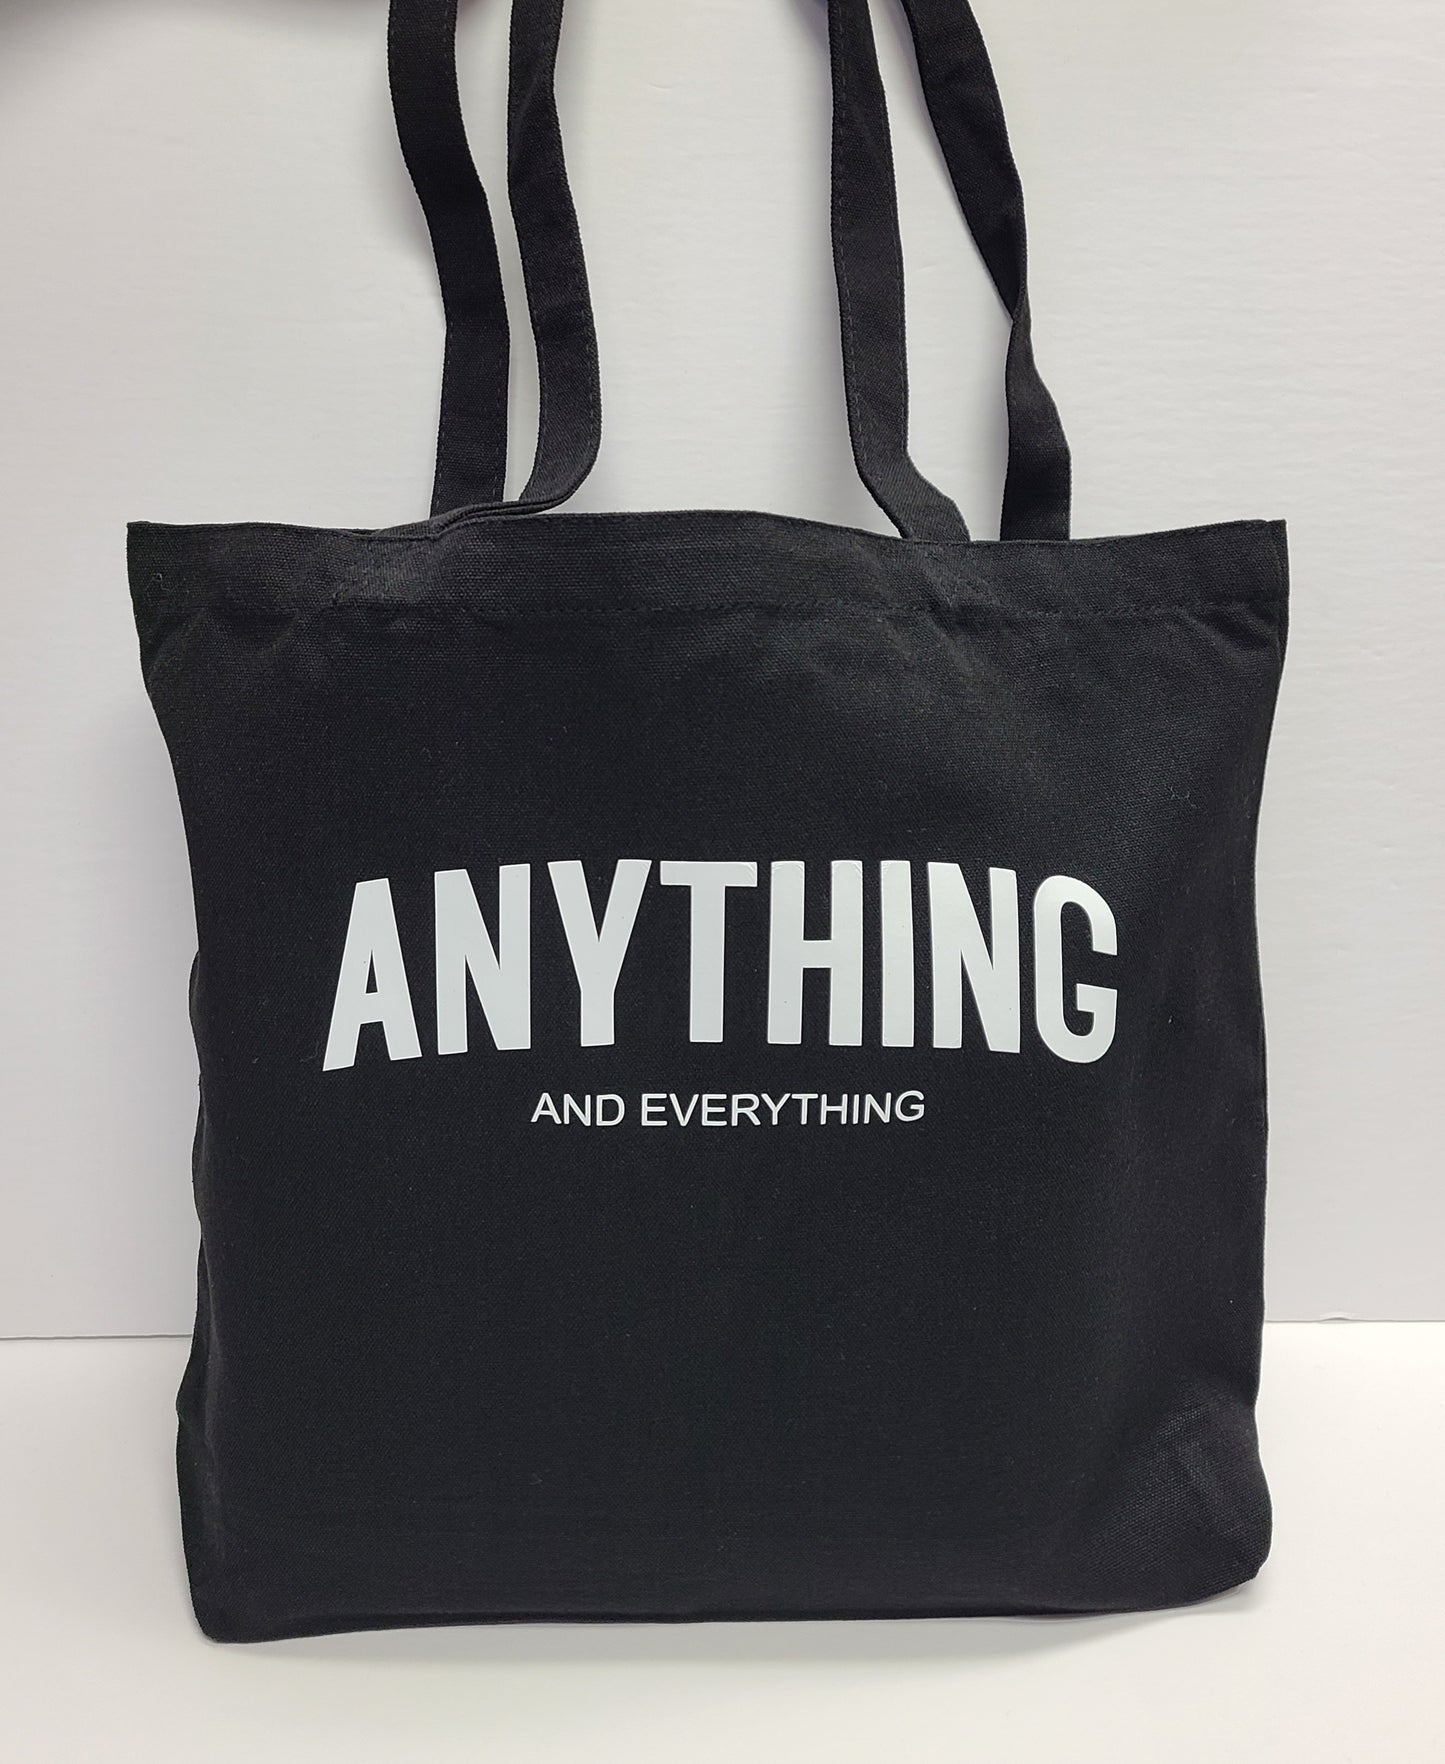 Anything and Everything Book Bag Black